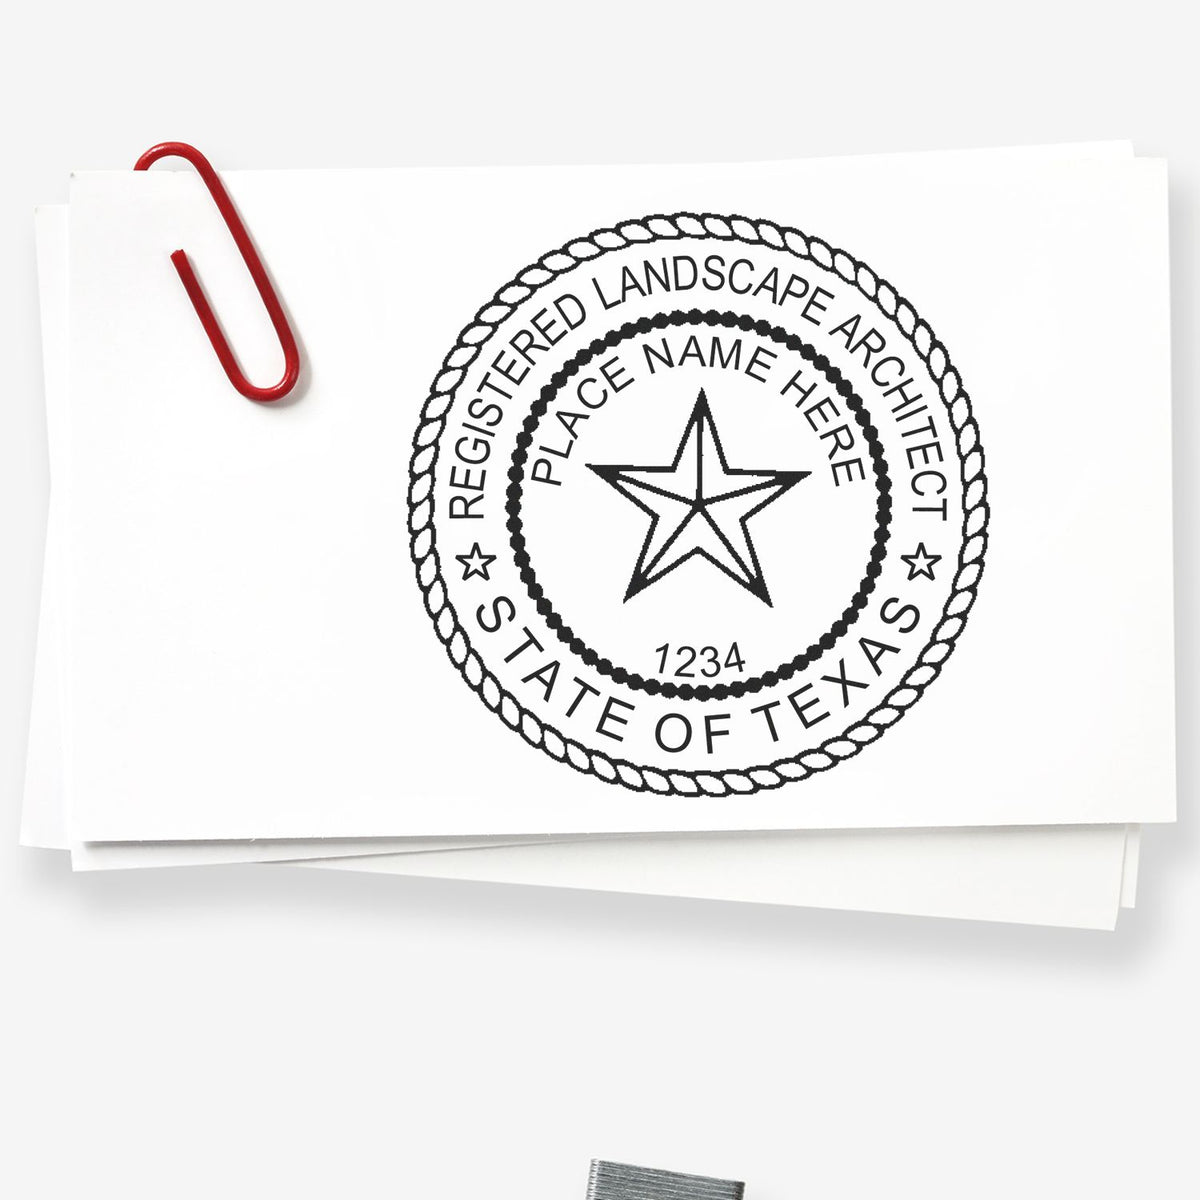 A lifestyle photo showing a stamped image of the Texas Landscape Architectural Seal Stamp on a piece of paper